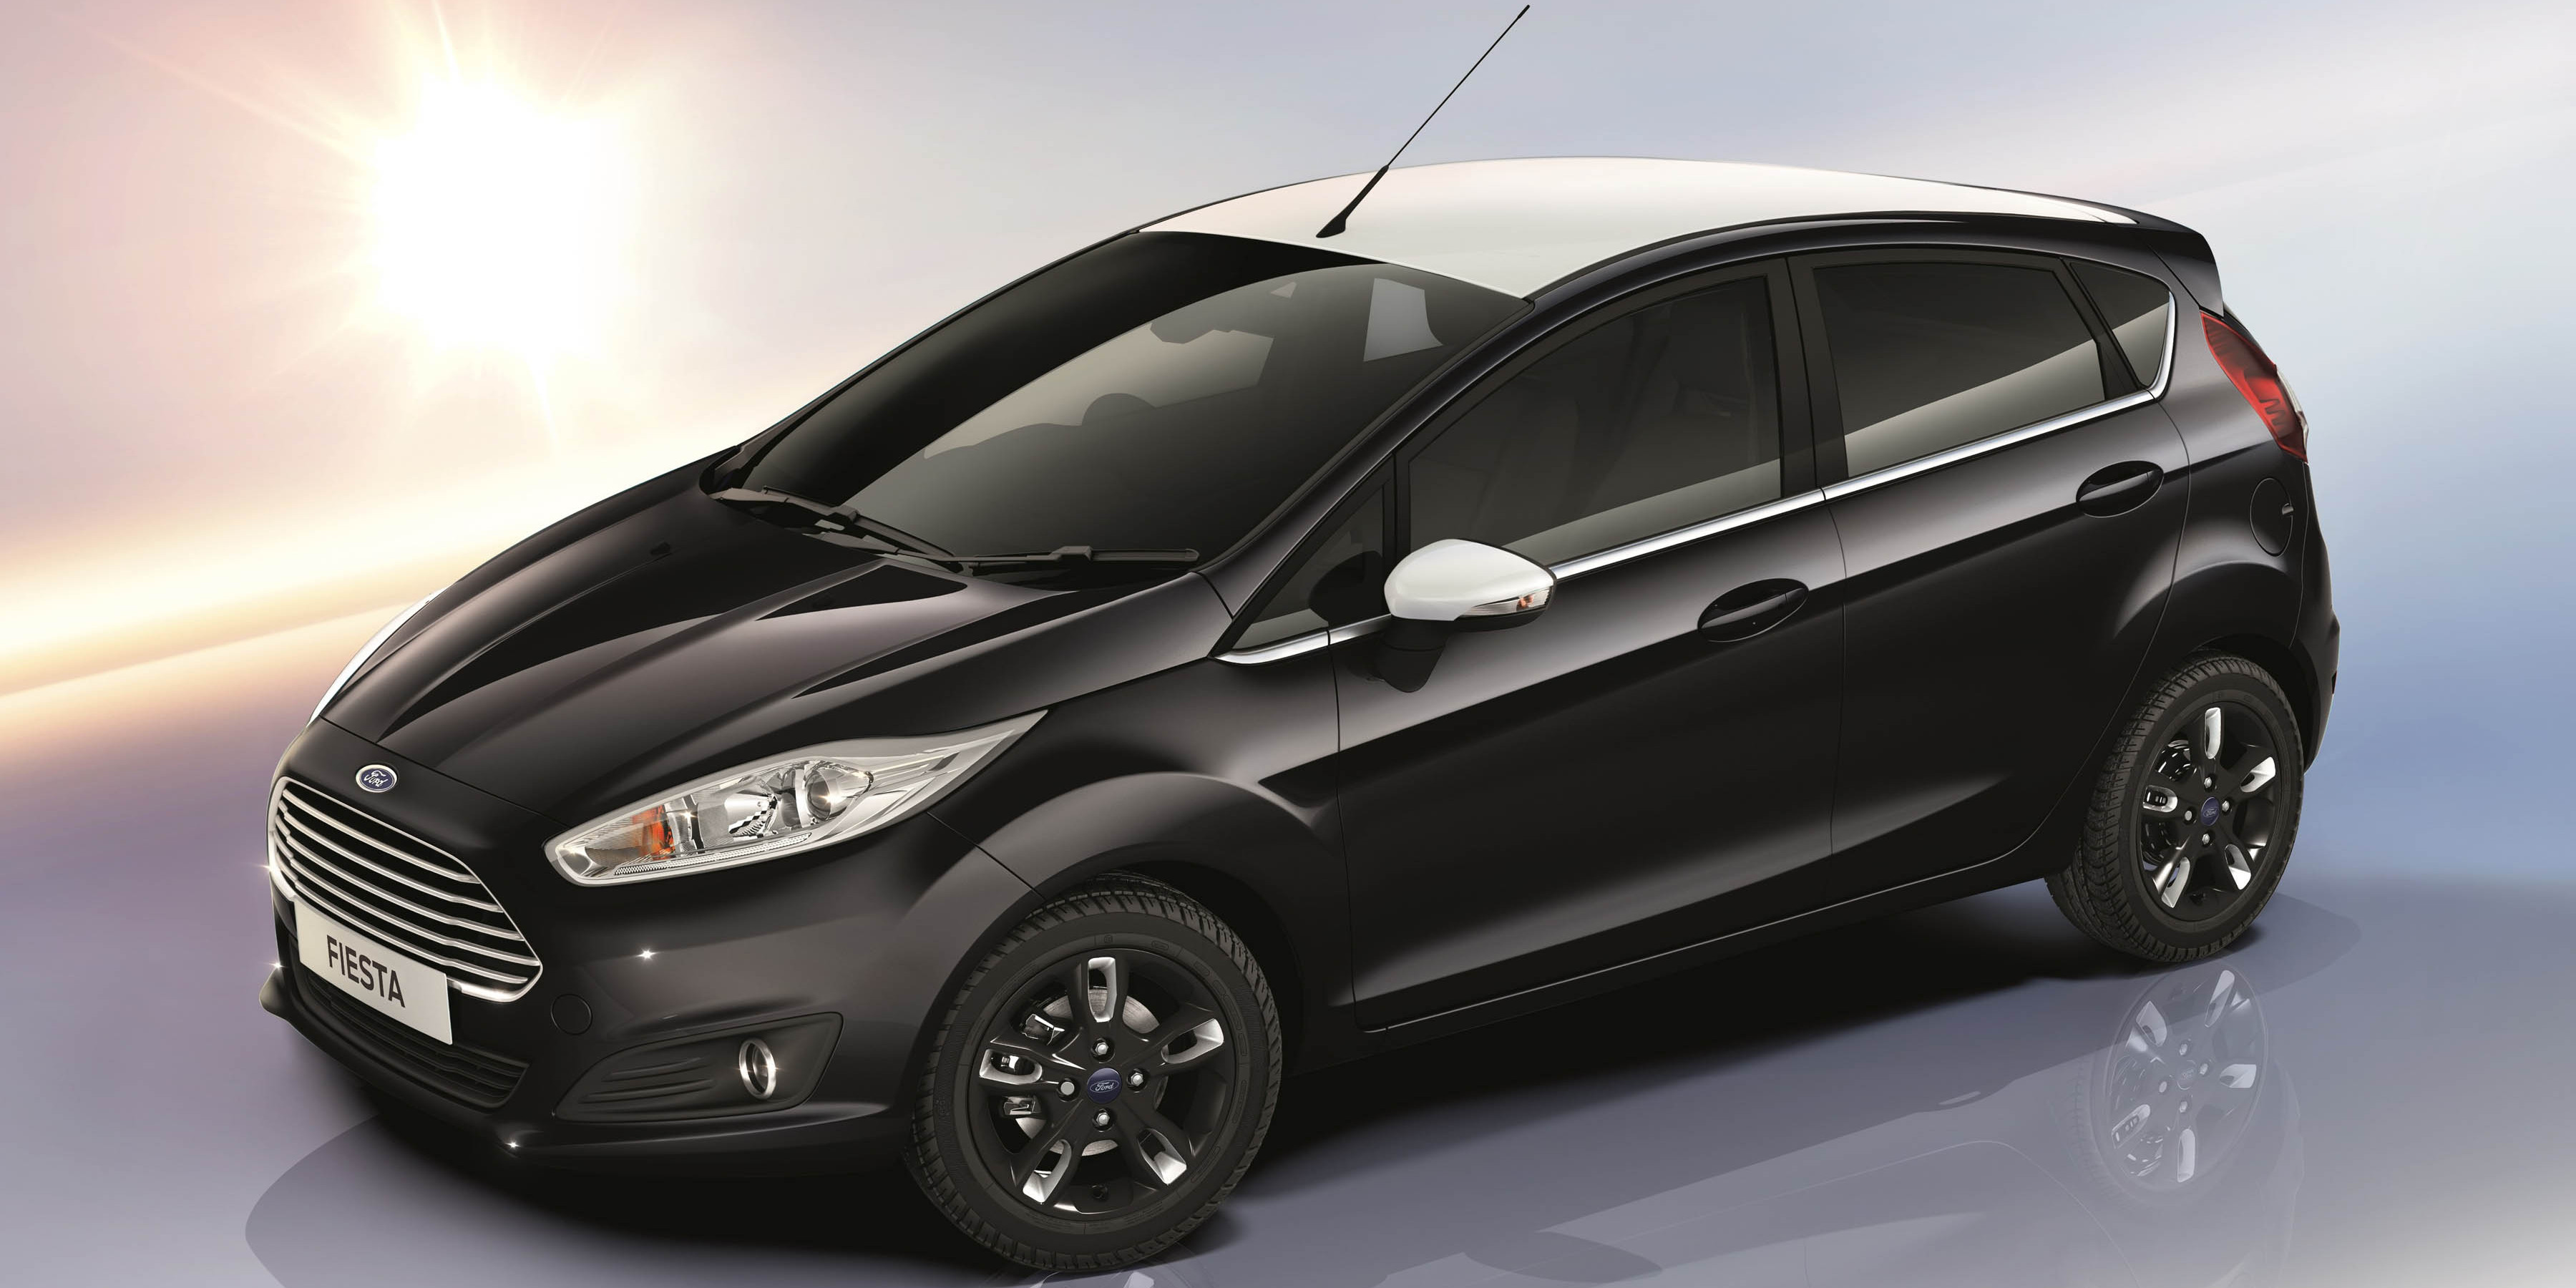 2016 Ford Fiesta Black, | Ford Authority